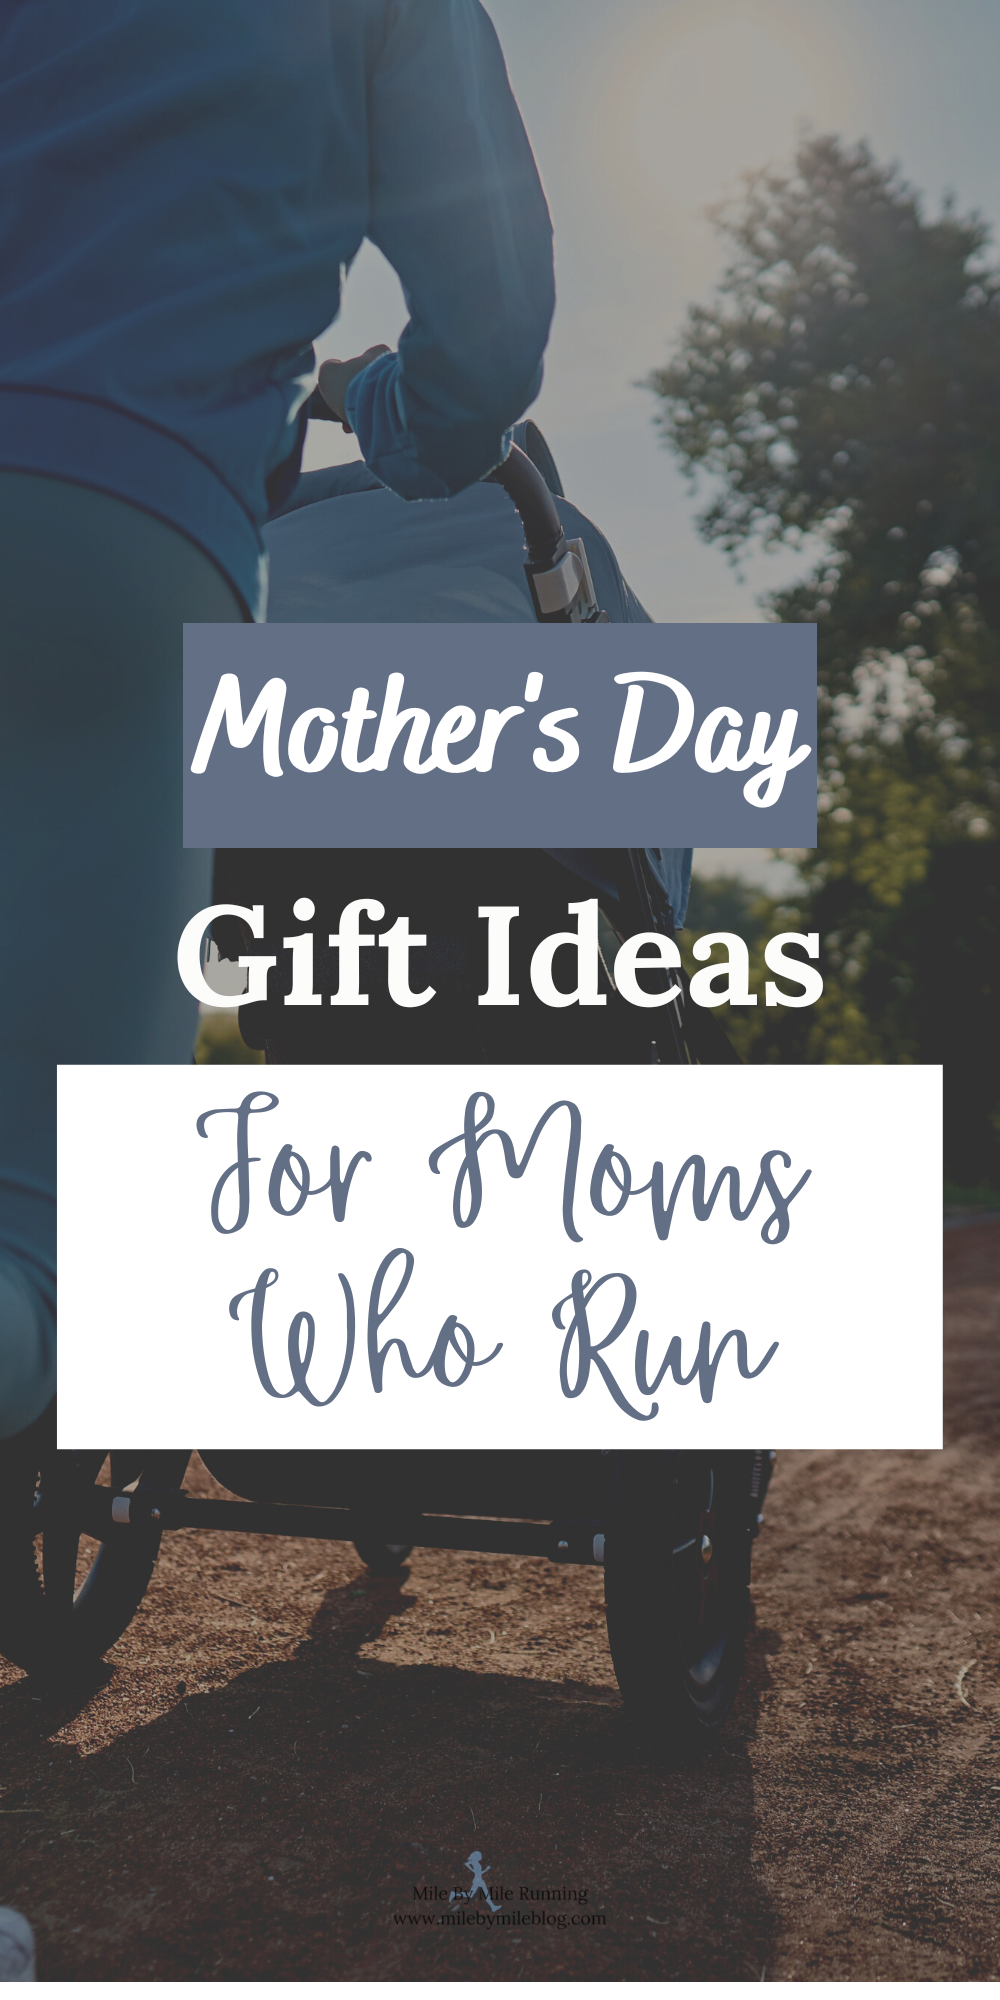 Mother's Day is coming up in a few weeks, so it's time to make sure that you have the perfect gift picked out for the moms in your life! Are you shopping for Mother's Day gift ideas for mom's who run? Or maybe you are a mother runner looking to do some shopping for yourself. This gift guide has you covered- and you don't need to be a mom to enjoy these gift ideas!